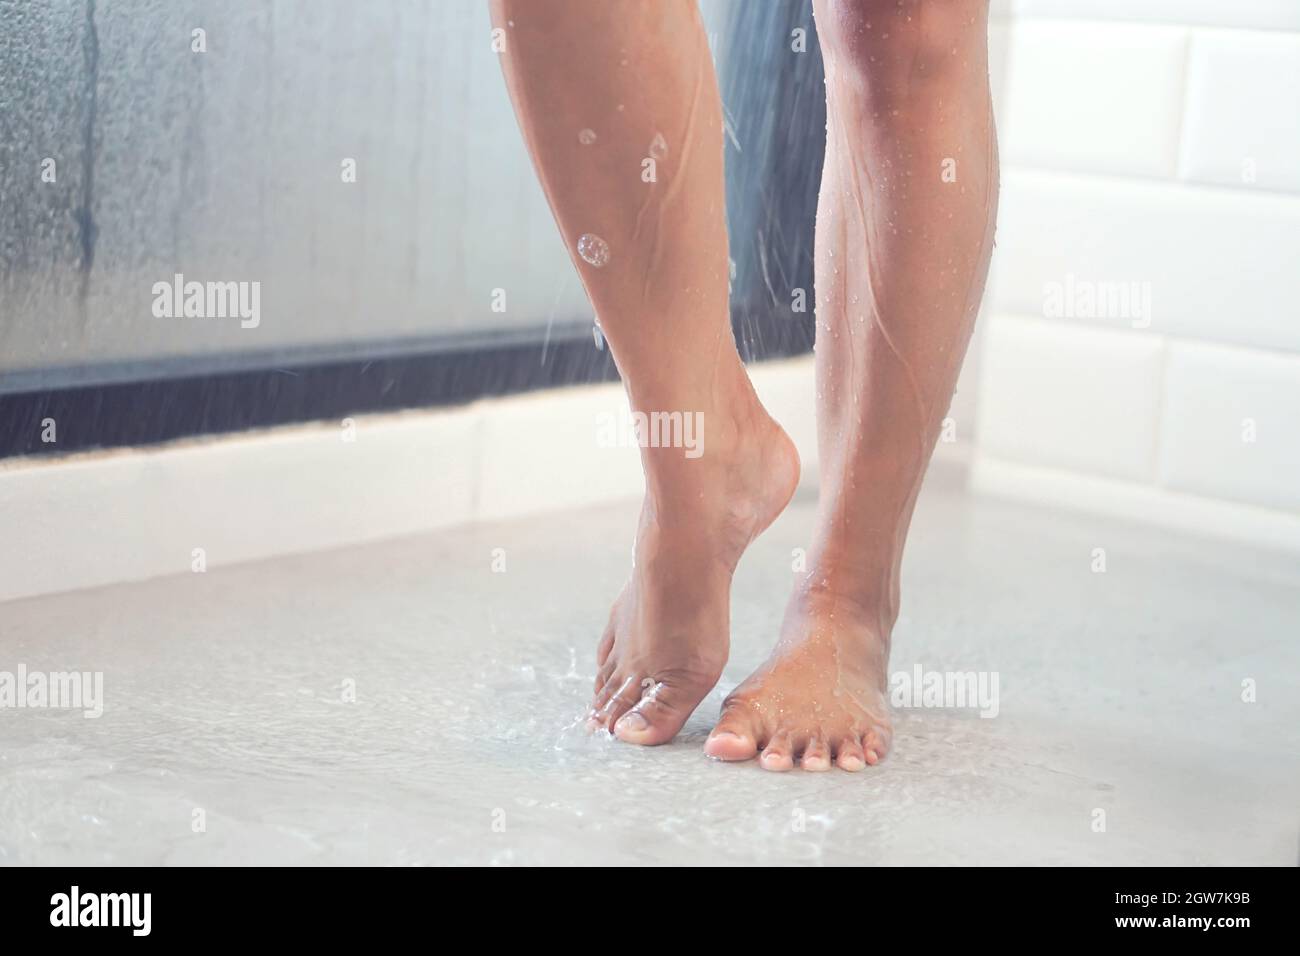 Low Section Of Woman Standing On Wet Floor While Bathing In Bathroom Stock Photo